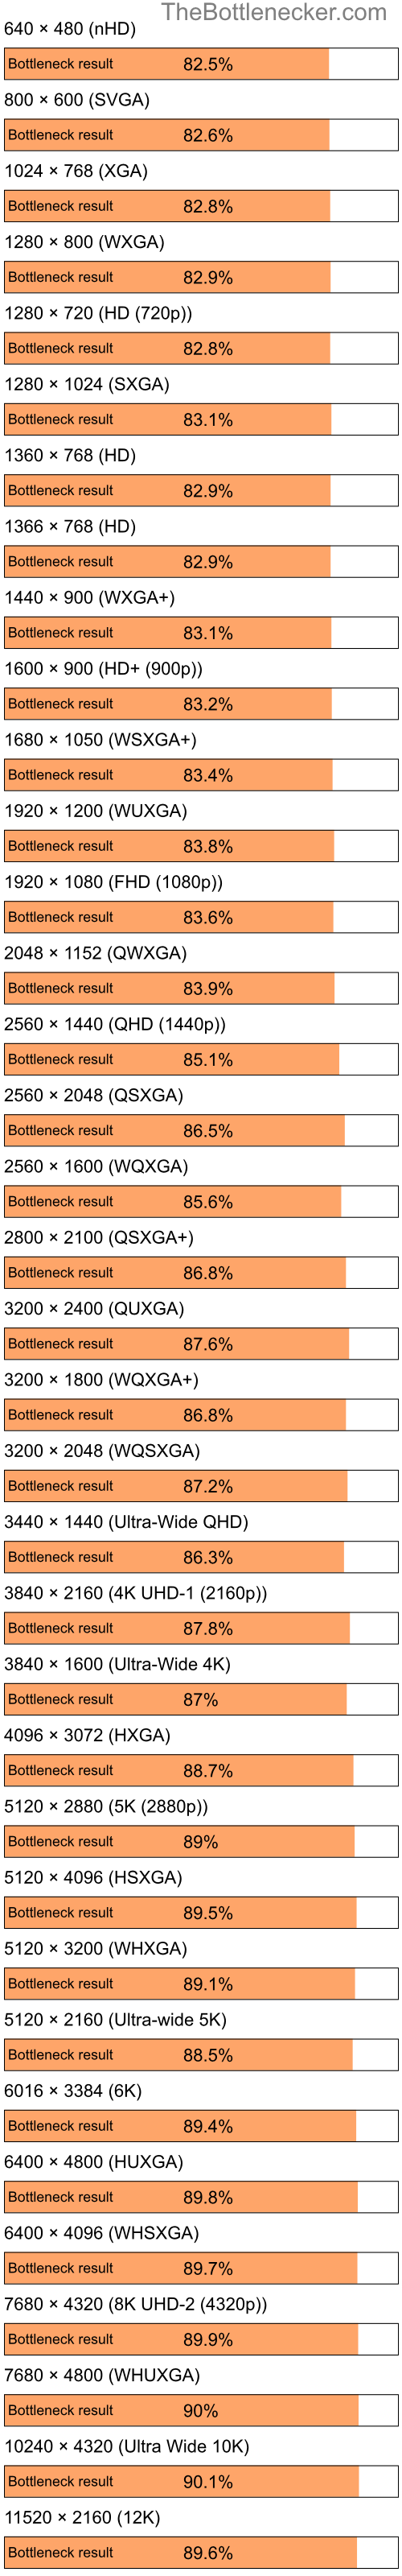 Bottleneck results by resolution for Intel Celeron and AMD Radeon 9600 Family in Graphic Card Intense Tasks